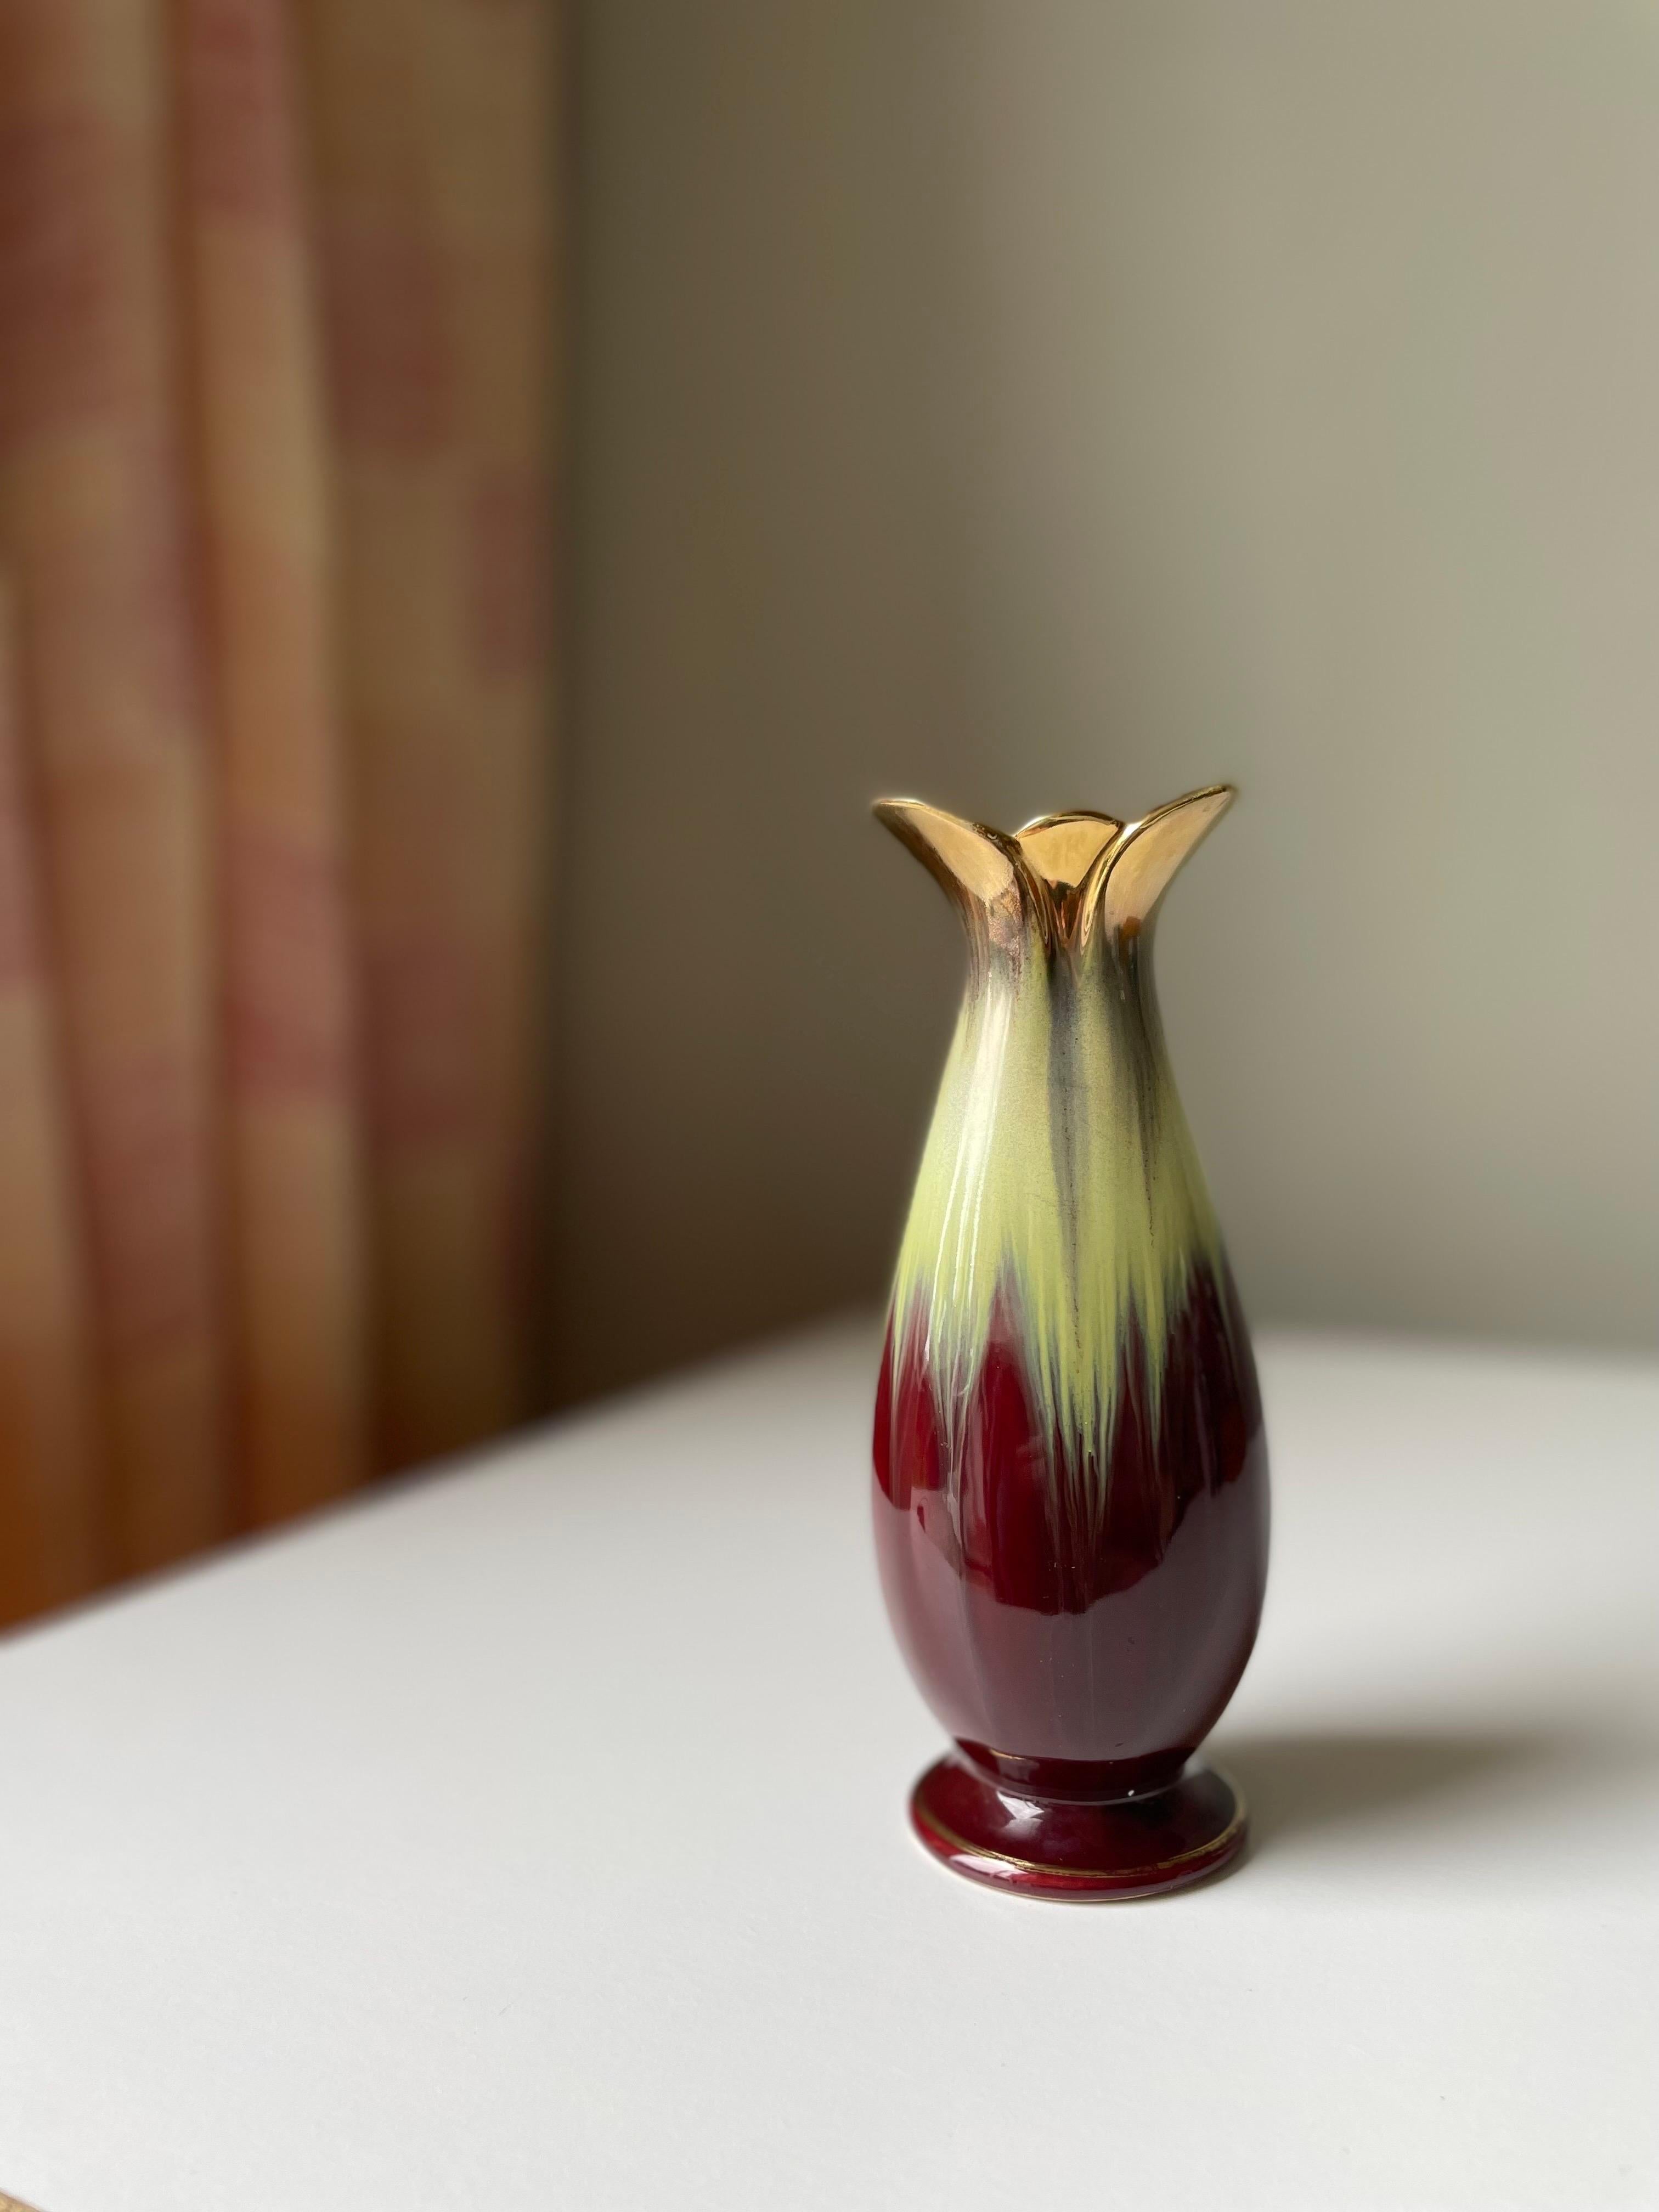 Midcentury decorative piece with shiny burgundy and lime running glaze. Golden round base and leaf shaped top on the organic floral like shape. Original label under base. Manufactured by Bay Ceramics in Germany in the 1960s. Beautiful vintage